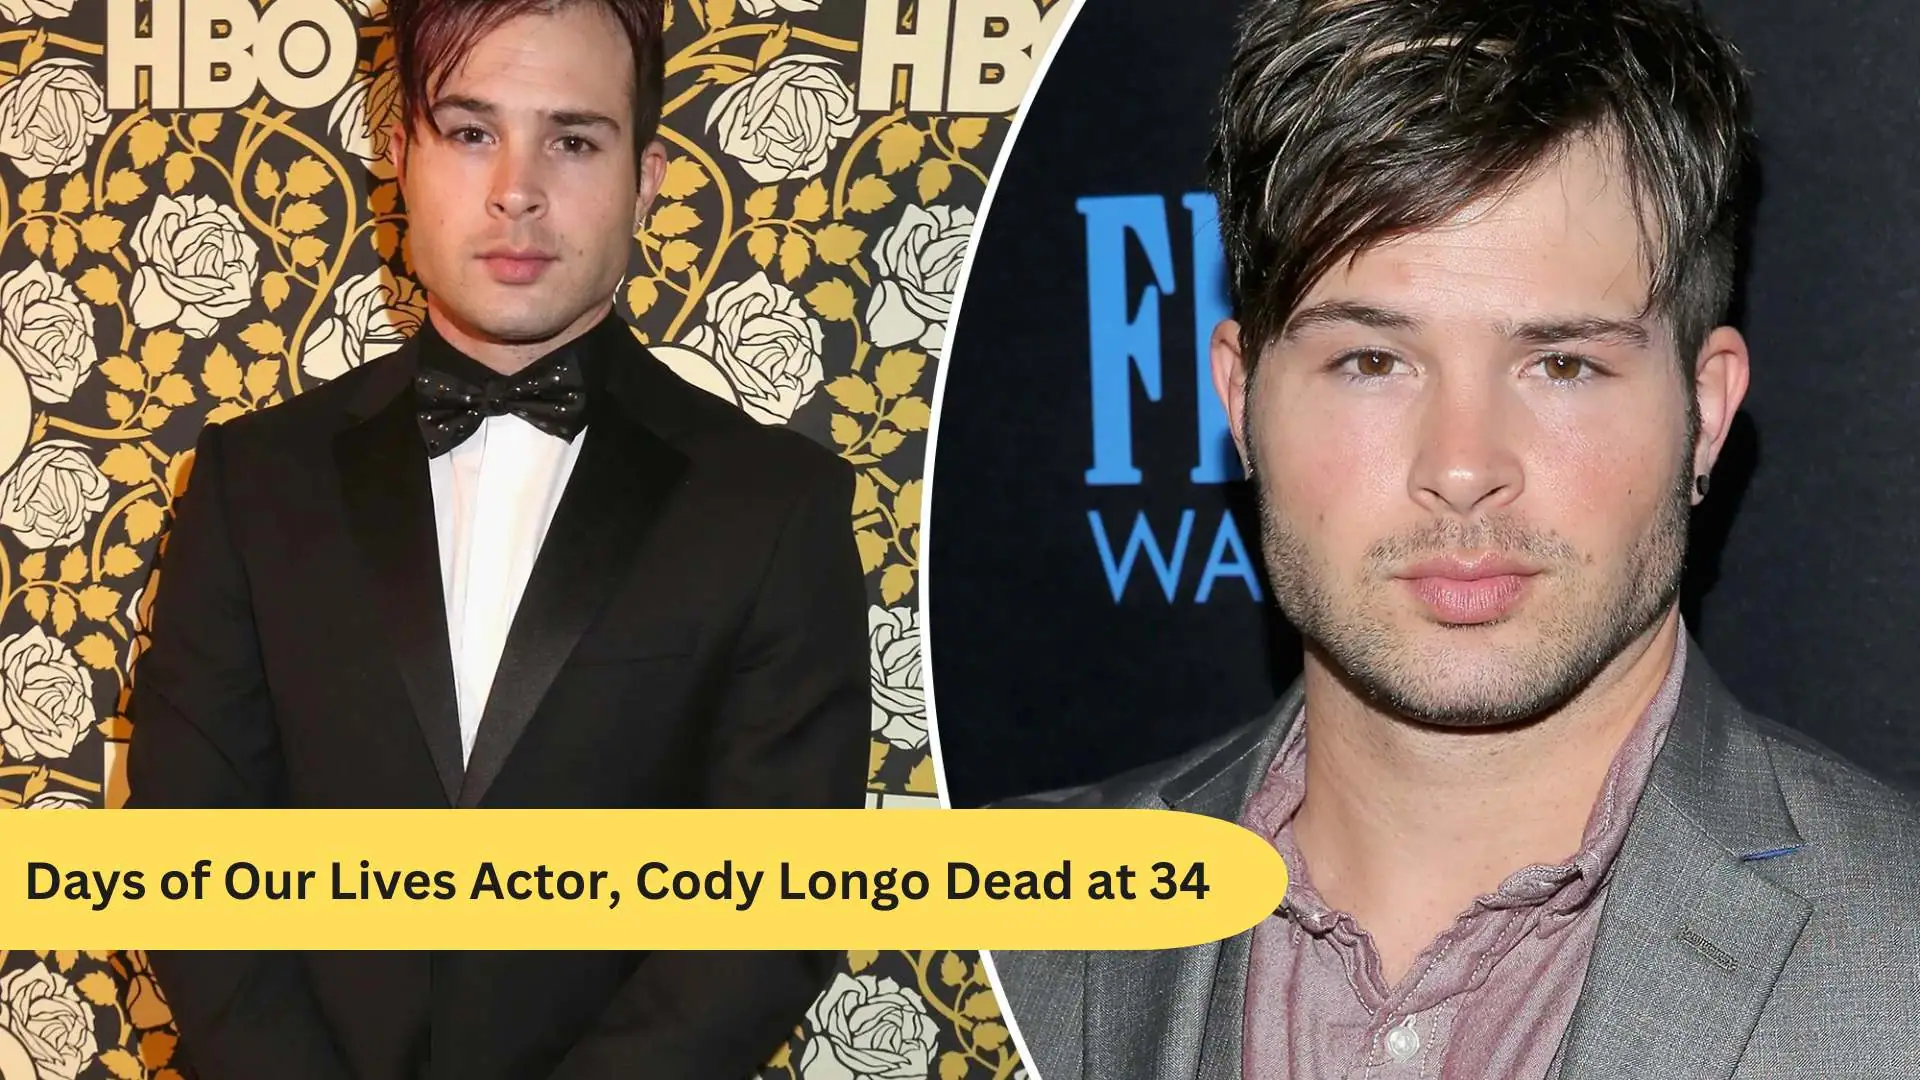 Days of Our Lives Actor, Cody Longo Dead at 34